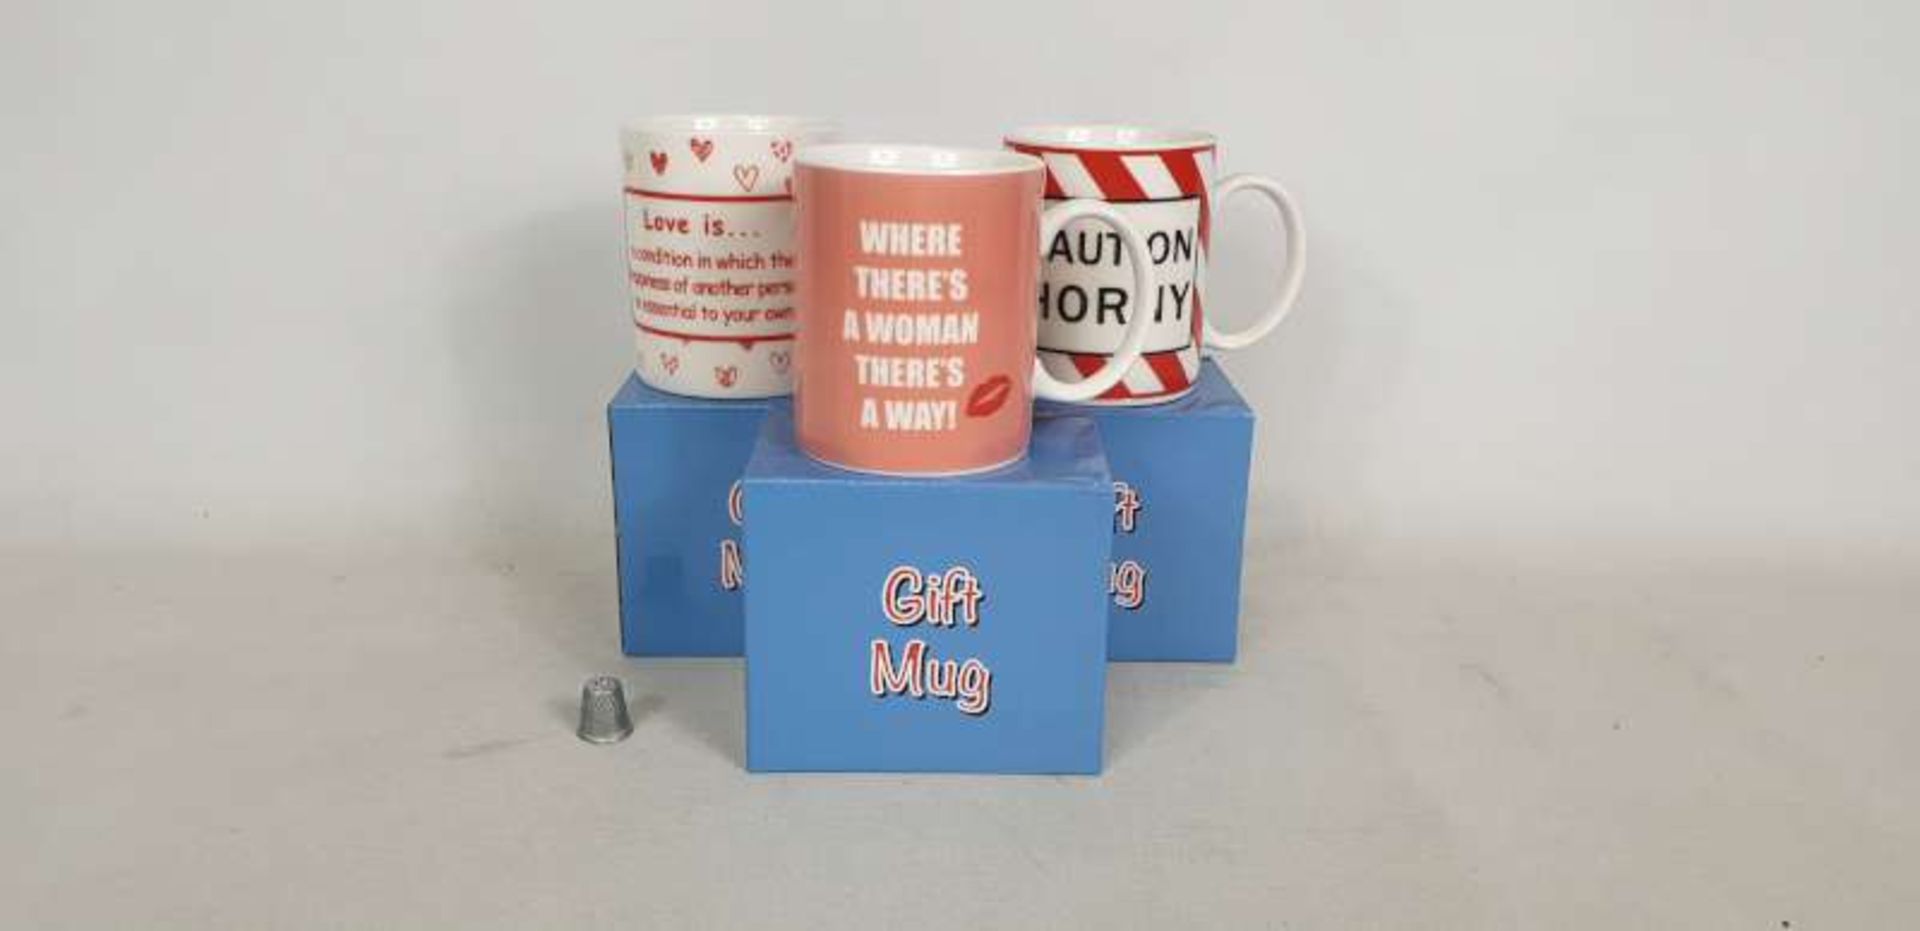 144 X GIFT MUGS IN 2 BOXES